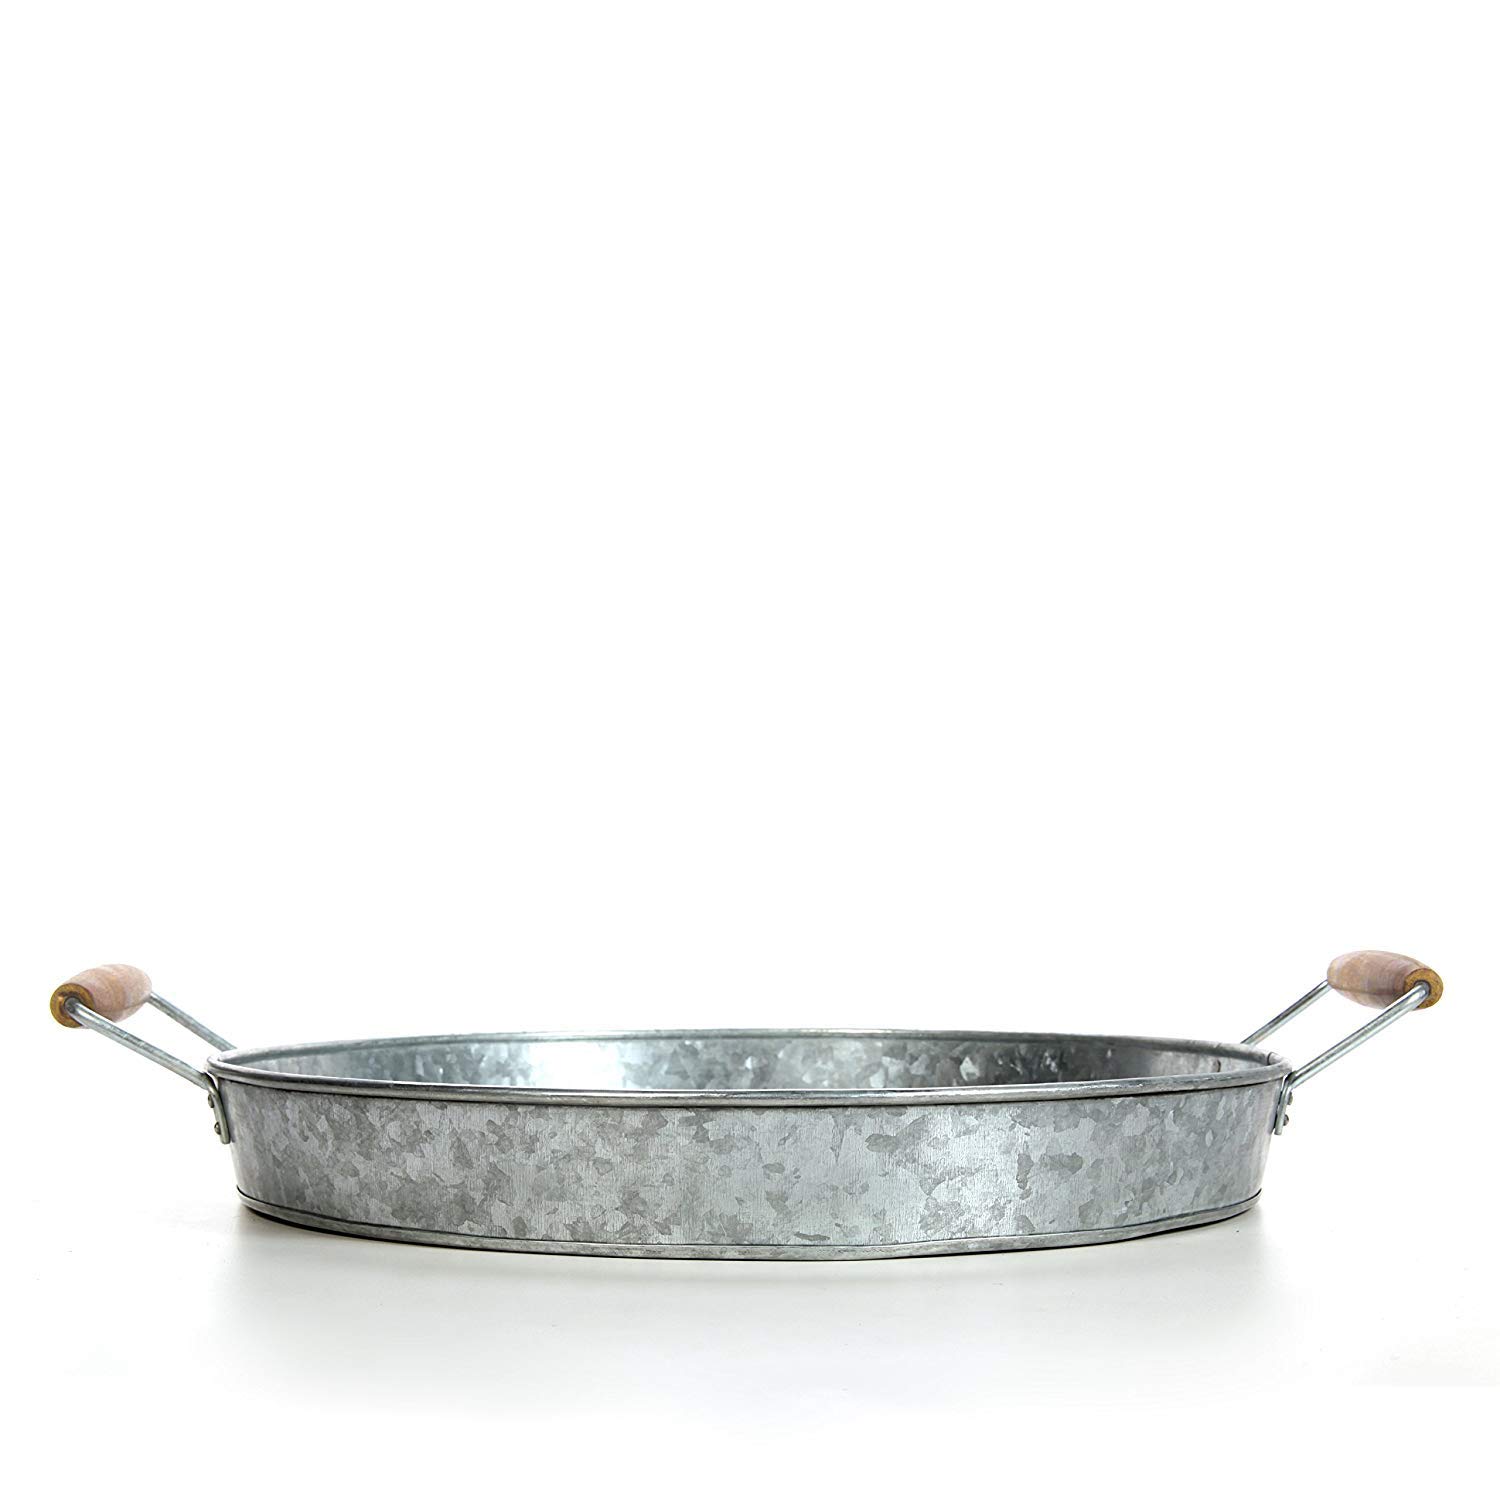 Gathery Galvanized Round Tray w/Wooden Handles for Home, Office, Party, Wedding, Spa, Serving (Original)